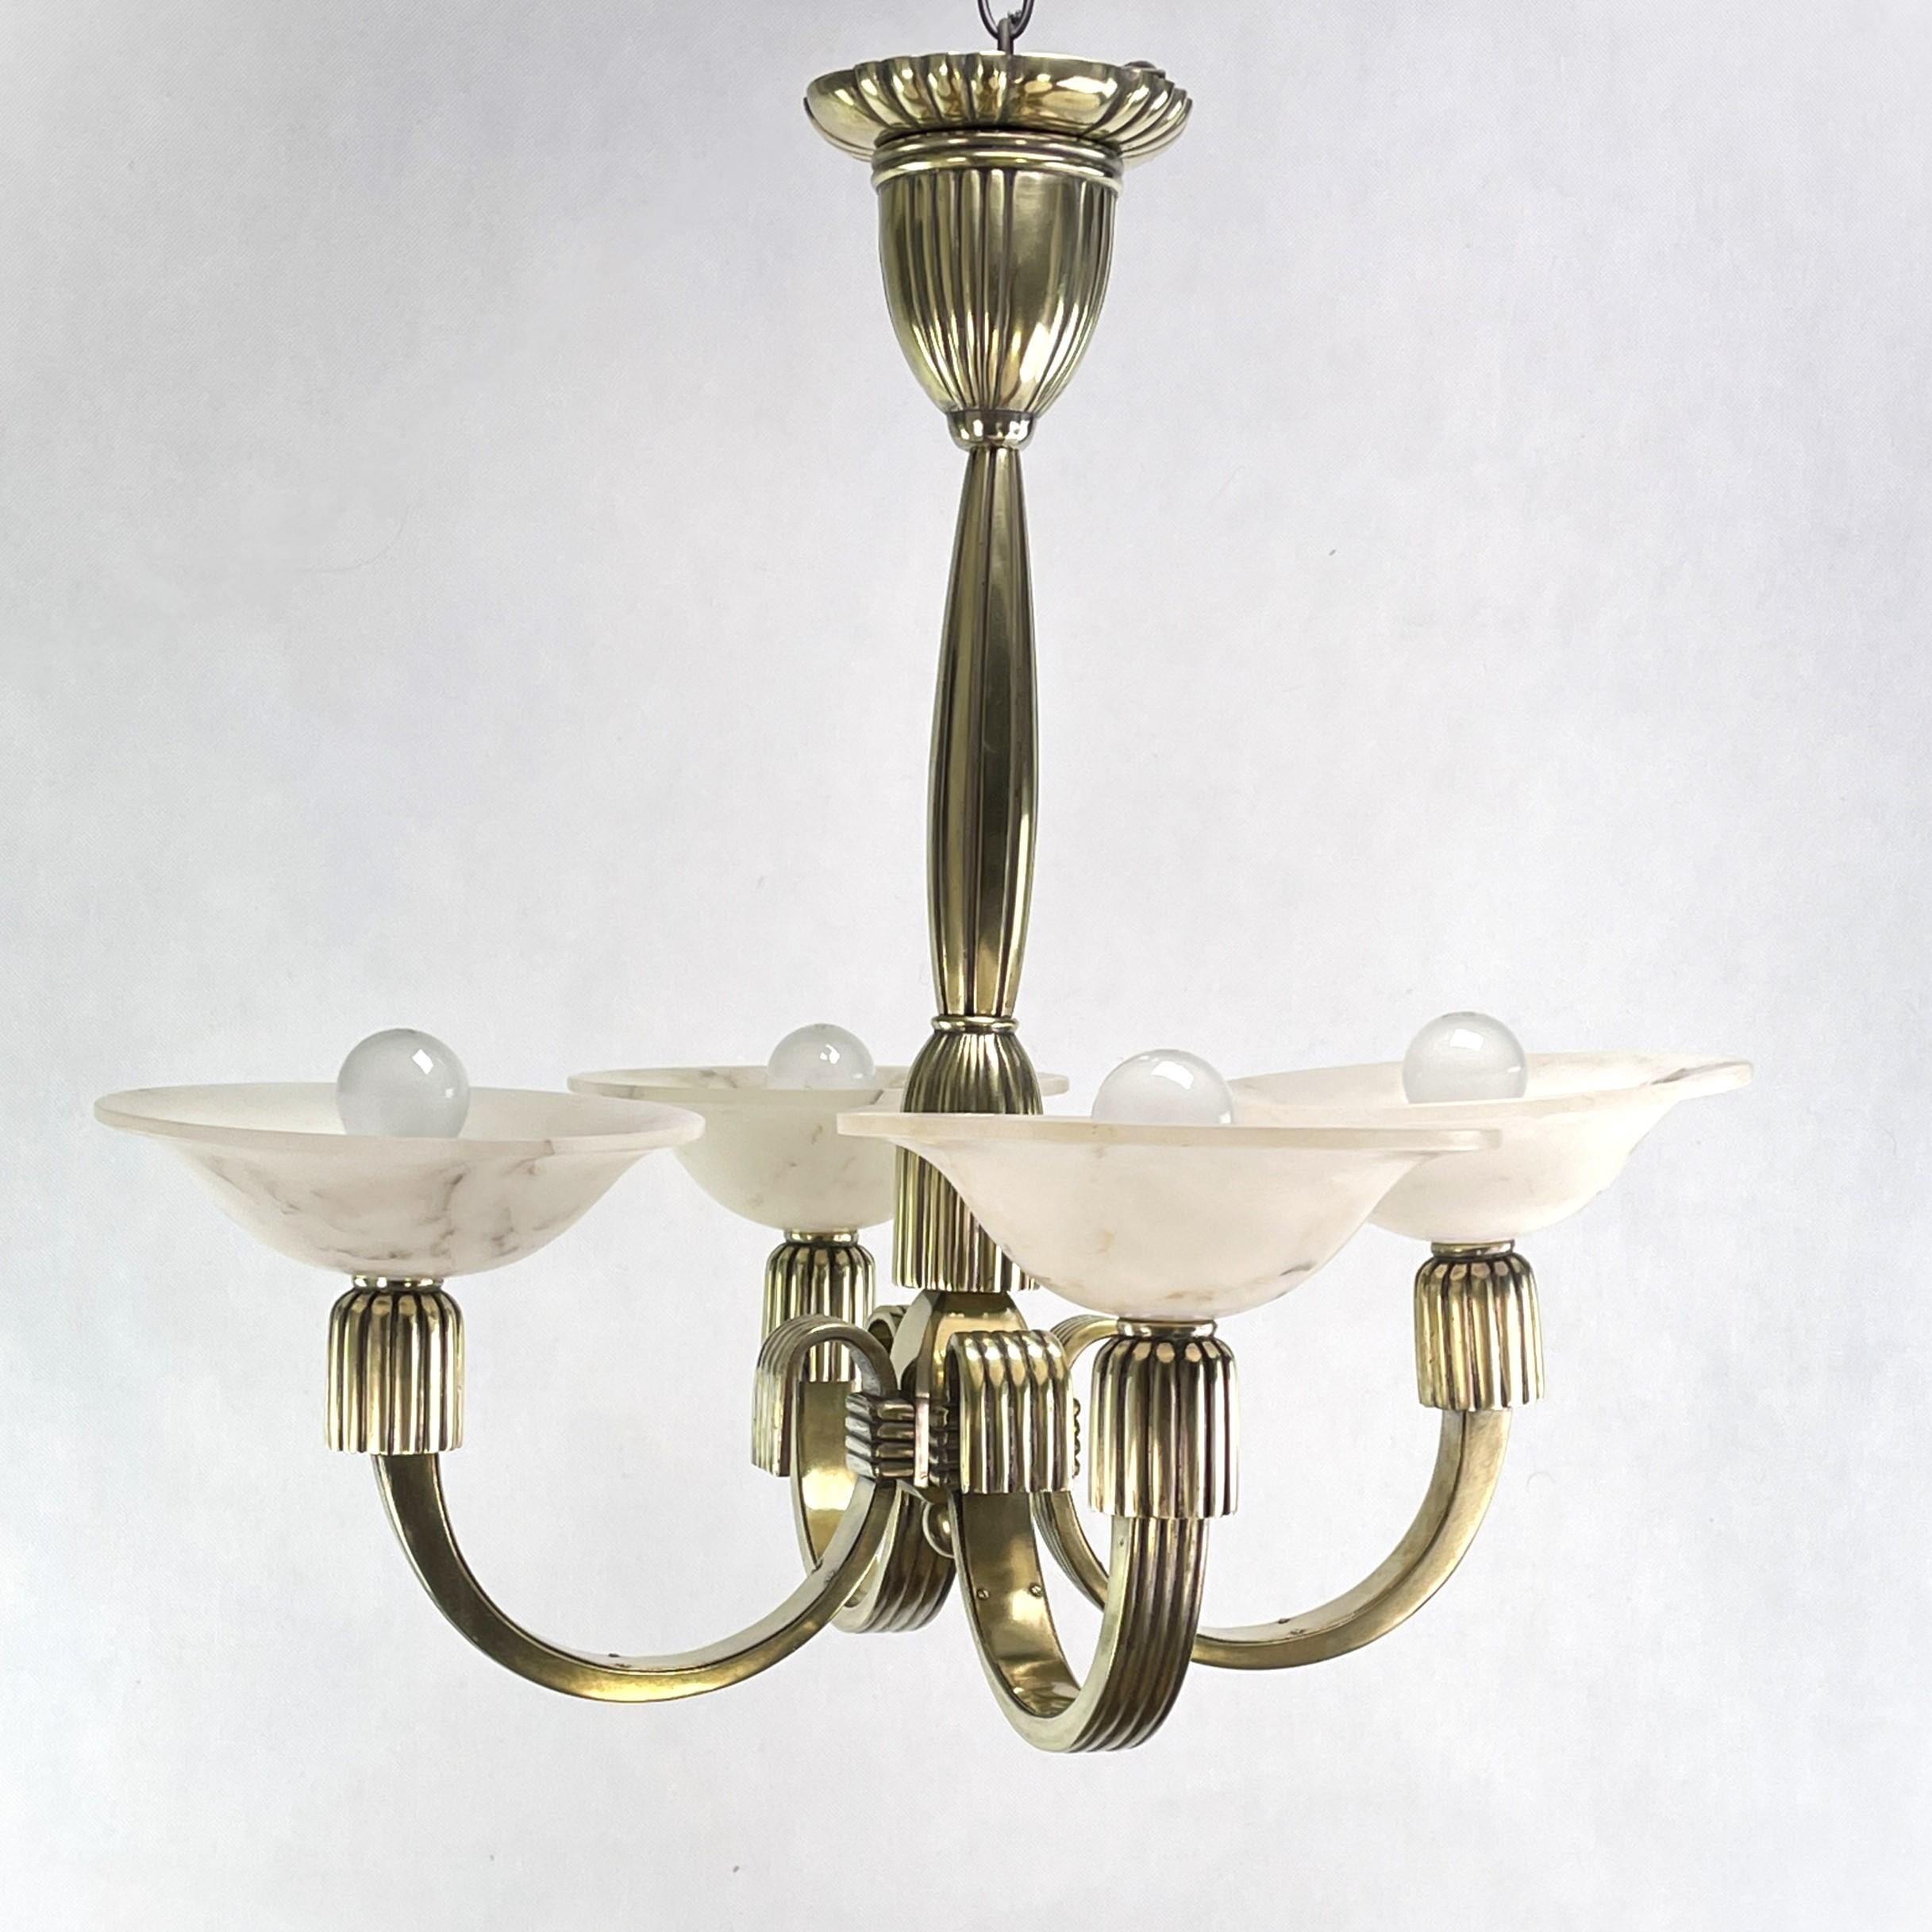 Art Deco chandelier - 1930s.

This beautiful antique pendant lamp captivates with its simple and sober Art Deco design. The lamp gives a very pleasant light. This ceiling lamp is an absolute design Classic from the Art Deco period.

The lamp has